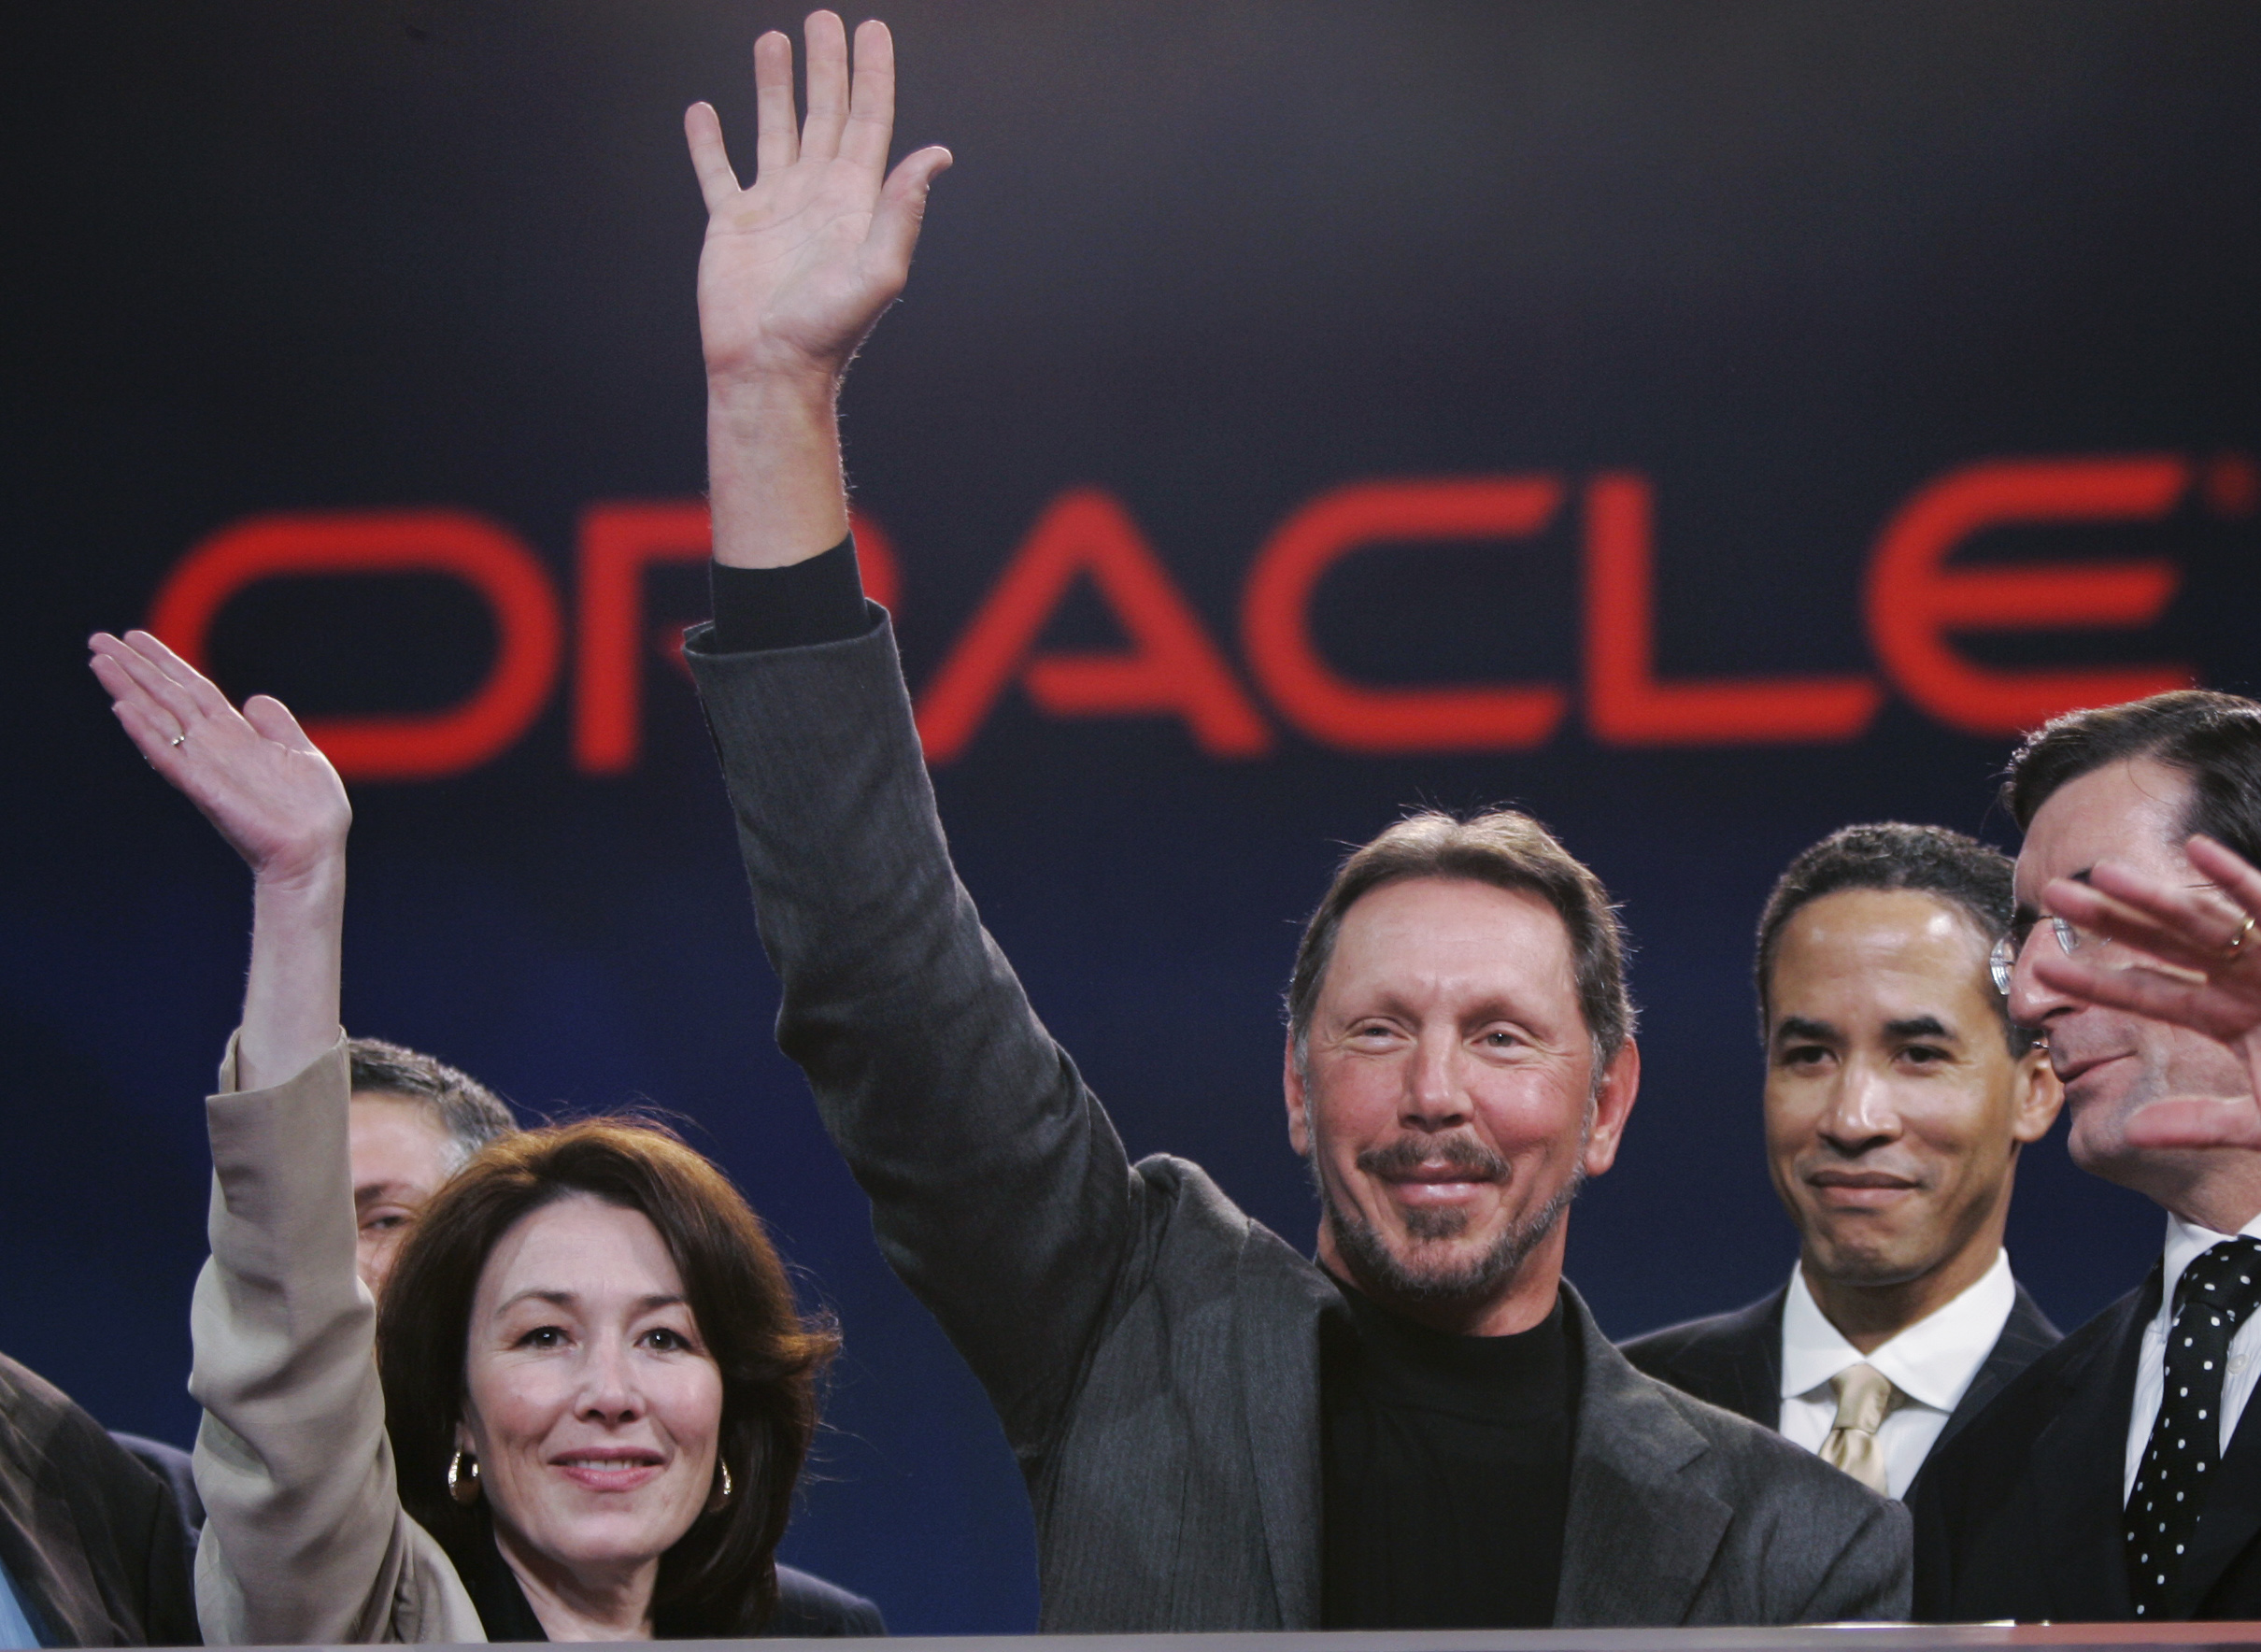 Oracle CEO Larry Ellison, center, smiles with Oracle CFO Safra Catz, left, and Oracle president Charles Phillips, second from right, during the Oracle Open World conference in San Francisco, Wednesday, Oct. 25, 2006. Oracle Corp. is scheduled to report fiscal second-quarter earnings after the bell. (AP Photo/Paul Sakuma)